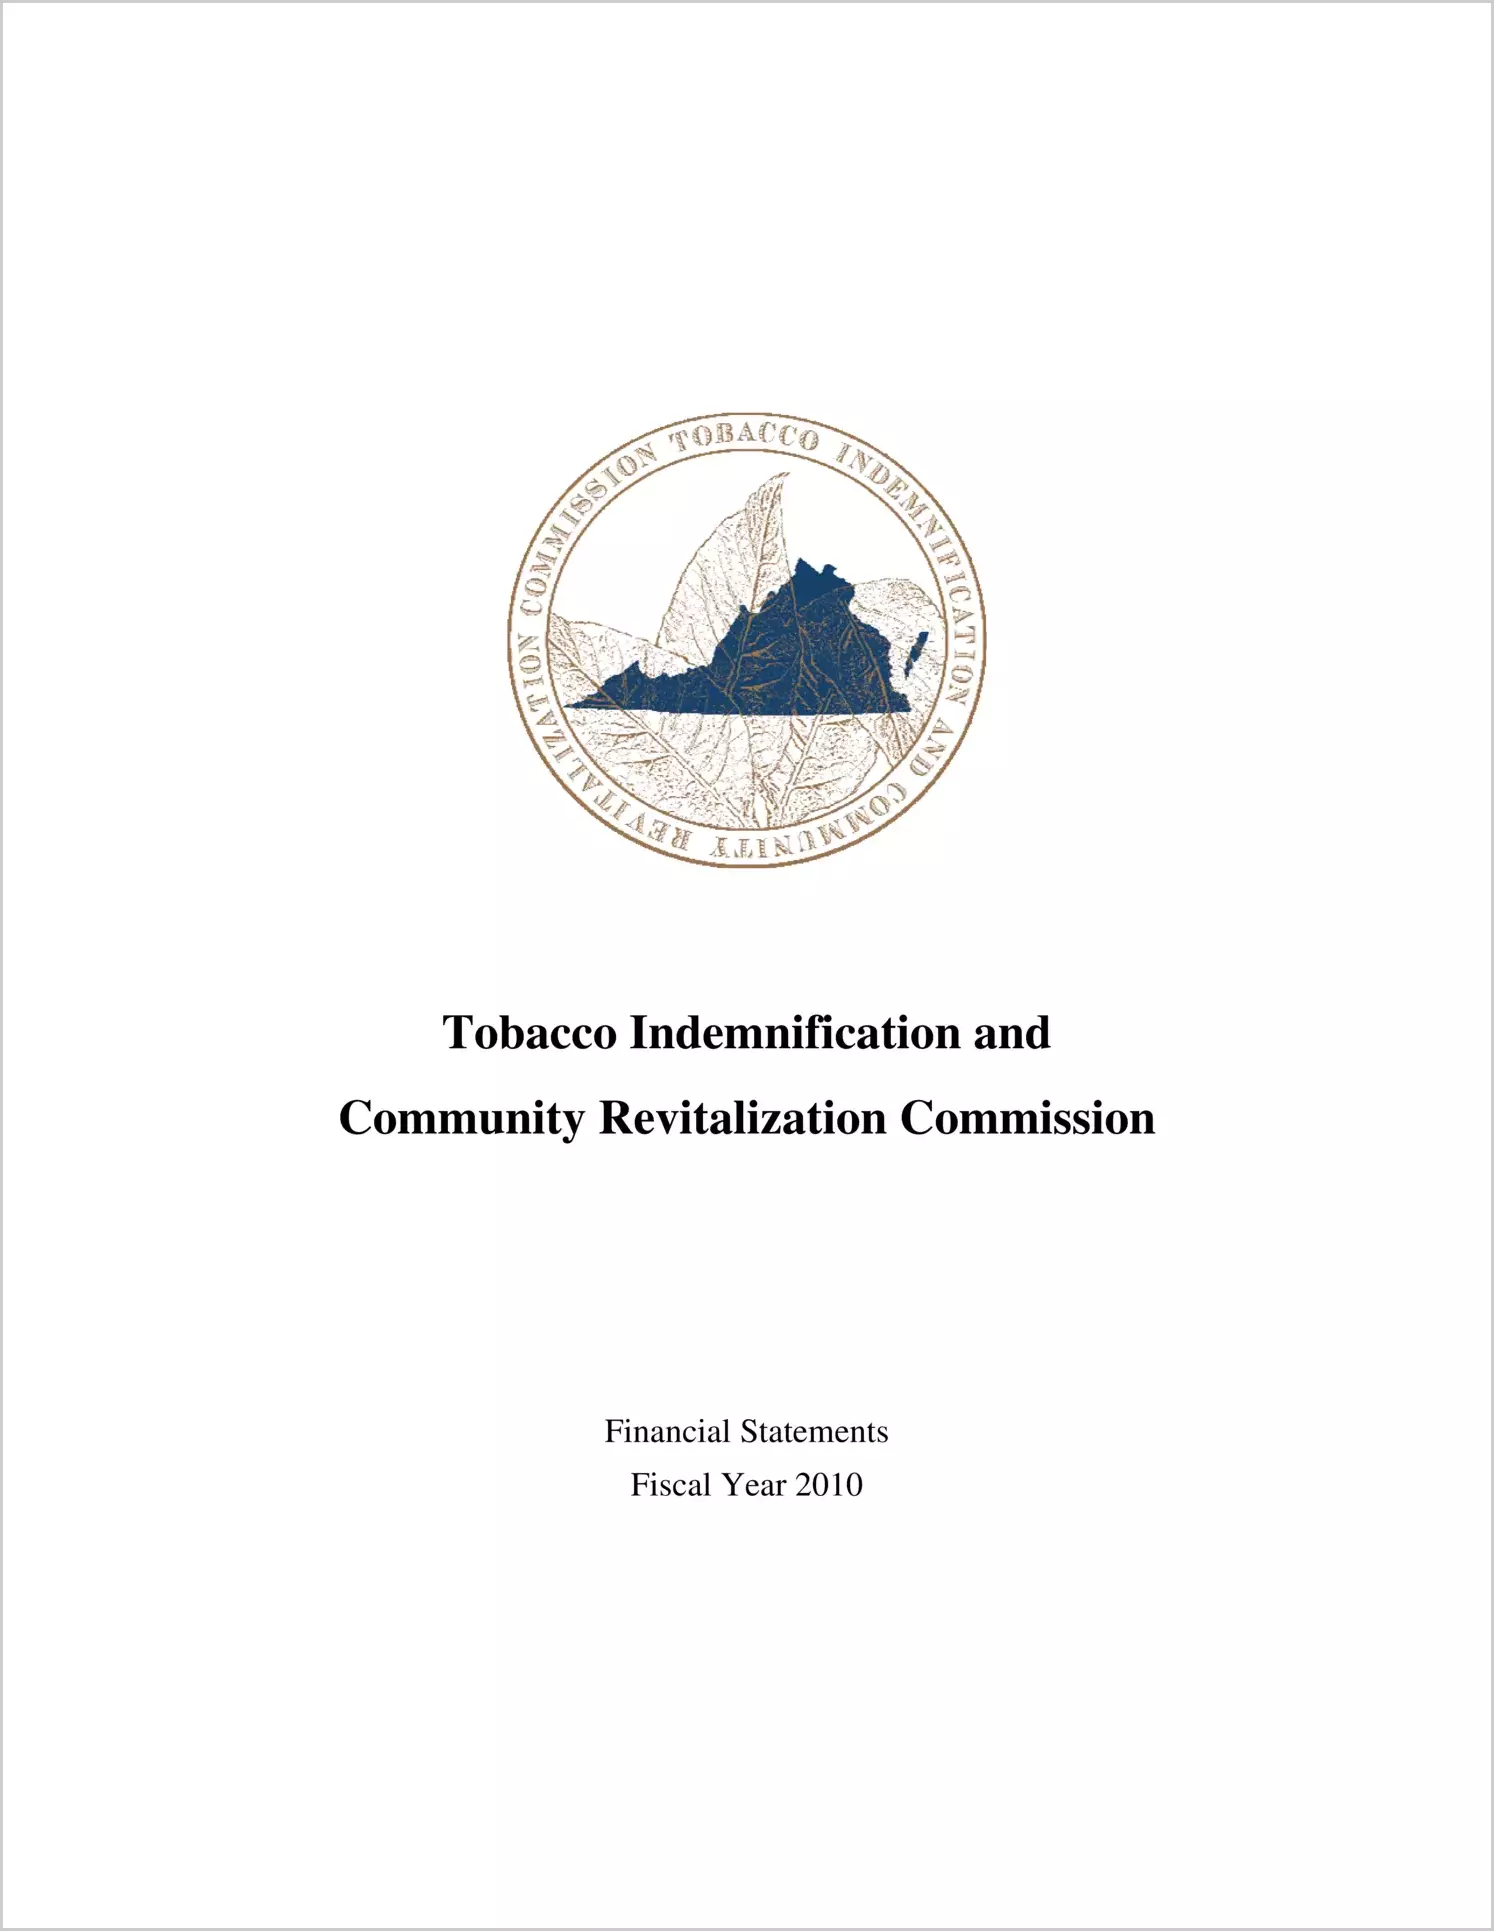 Tobacco Indemnification and Community Revitalization Commission Financial Statements Report for the year ended June 30, 2010